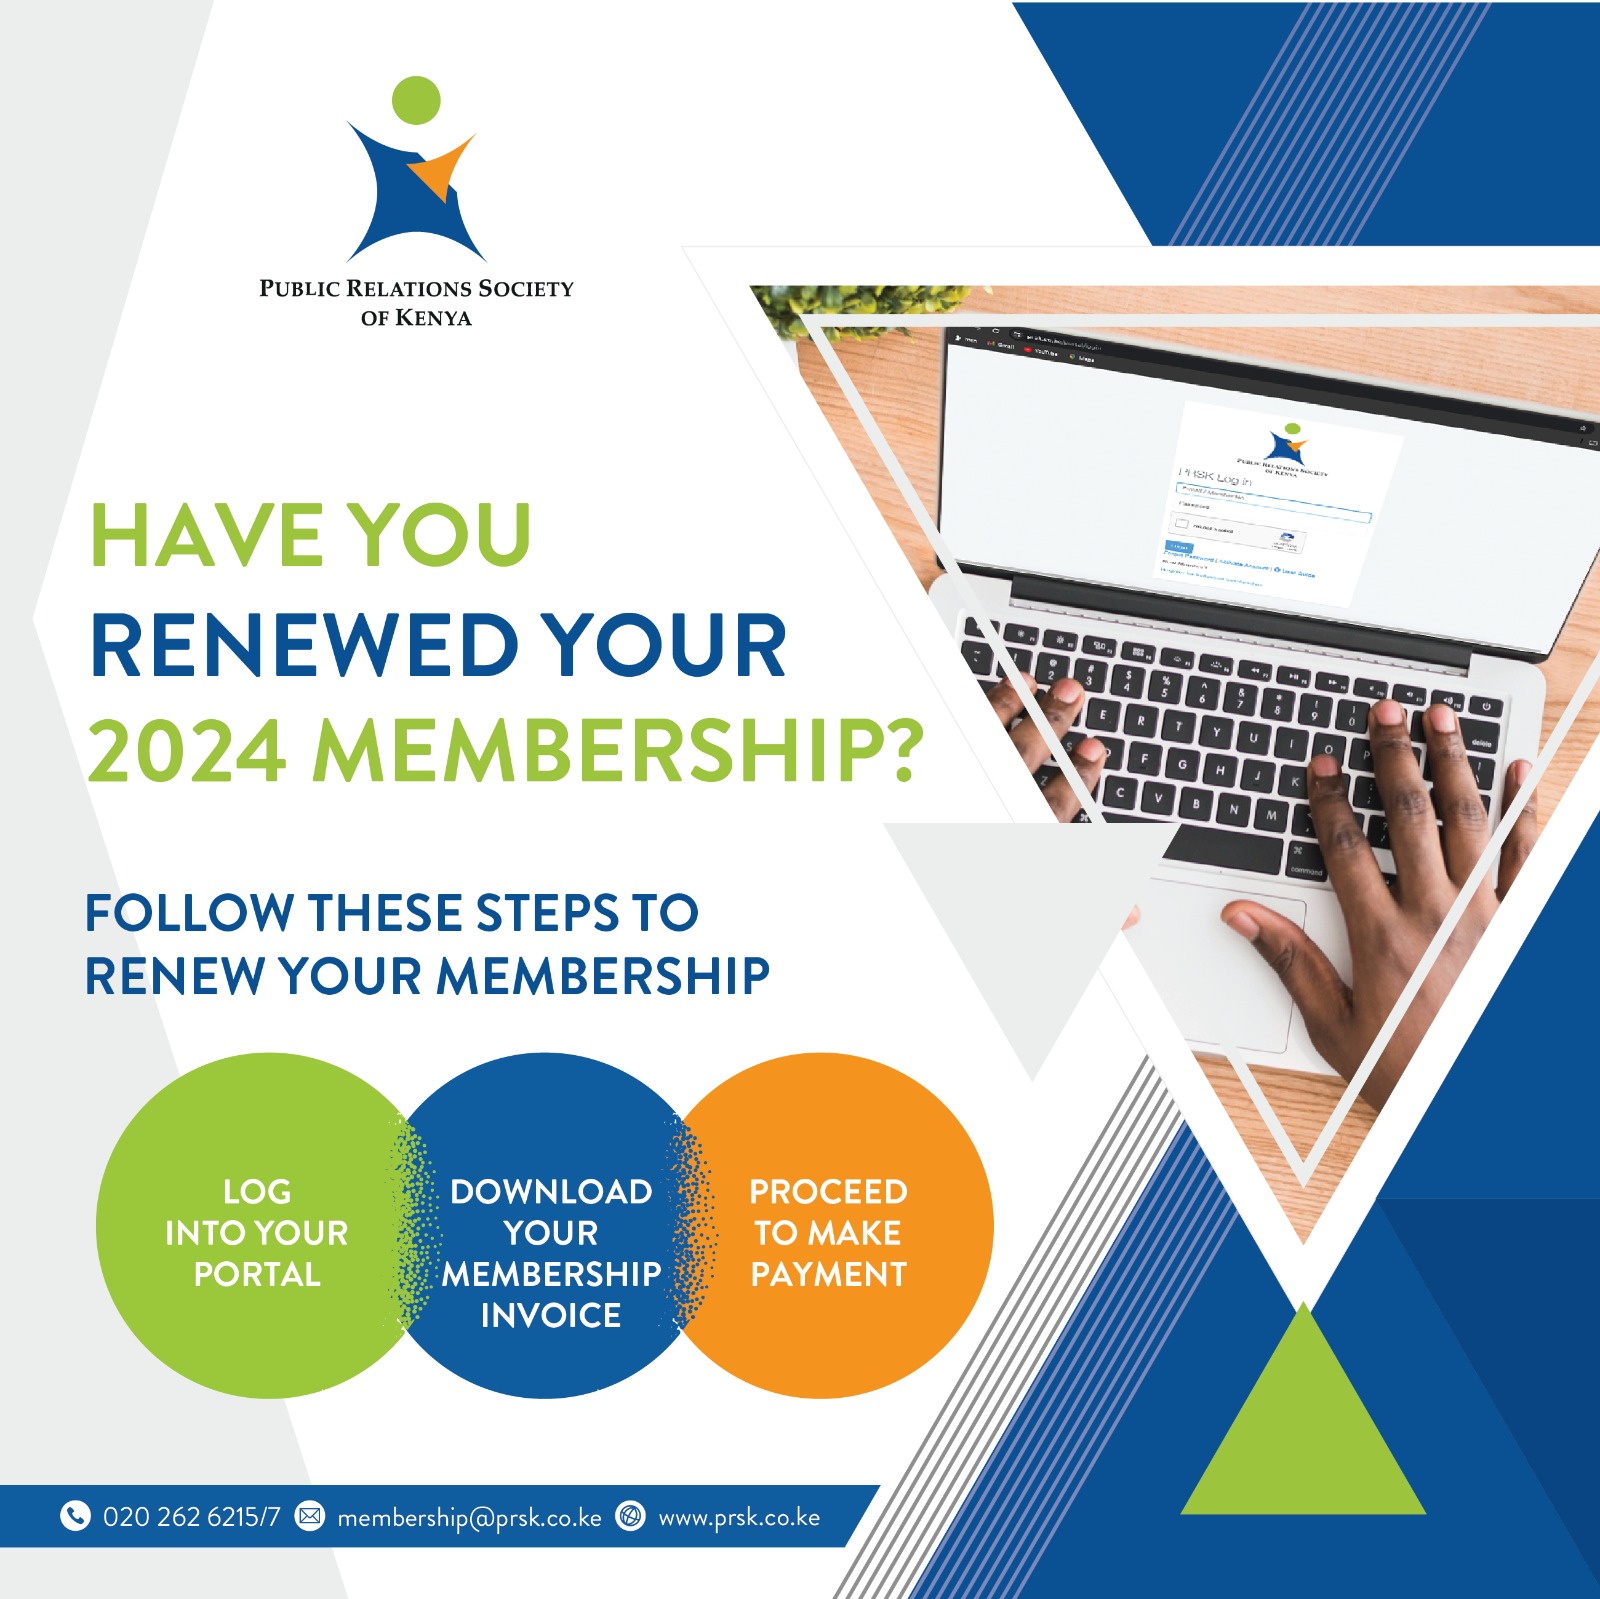 Have you renewed your 2024 Membership?